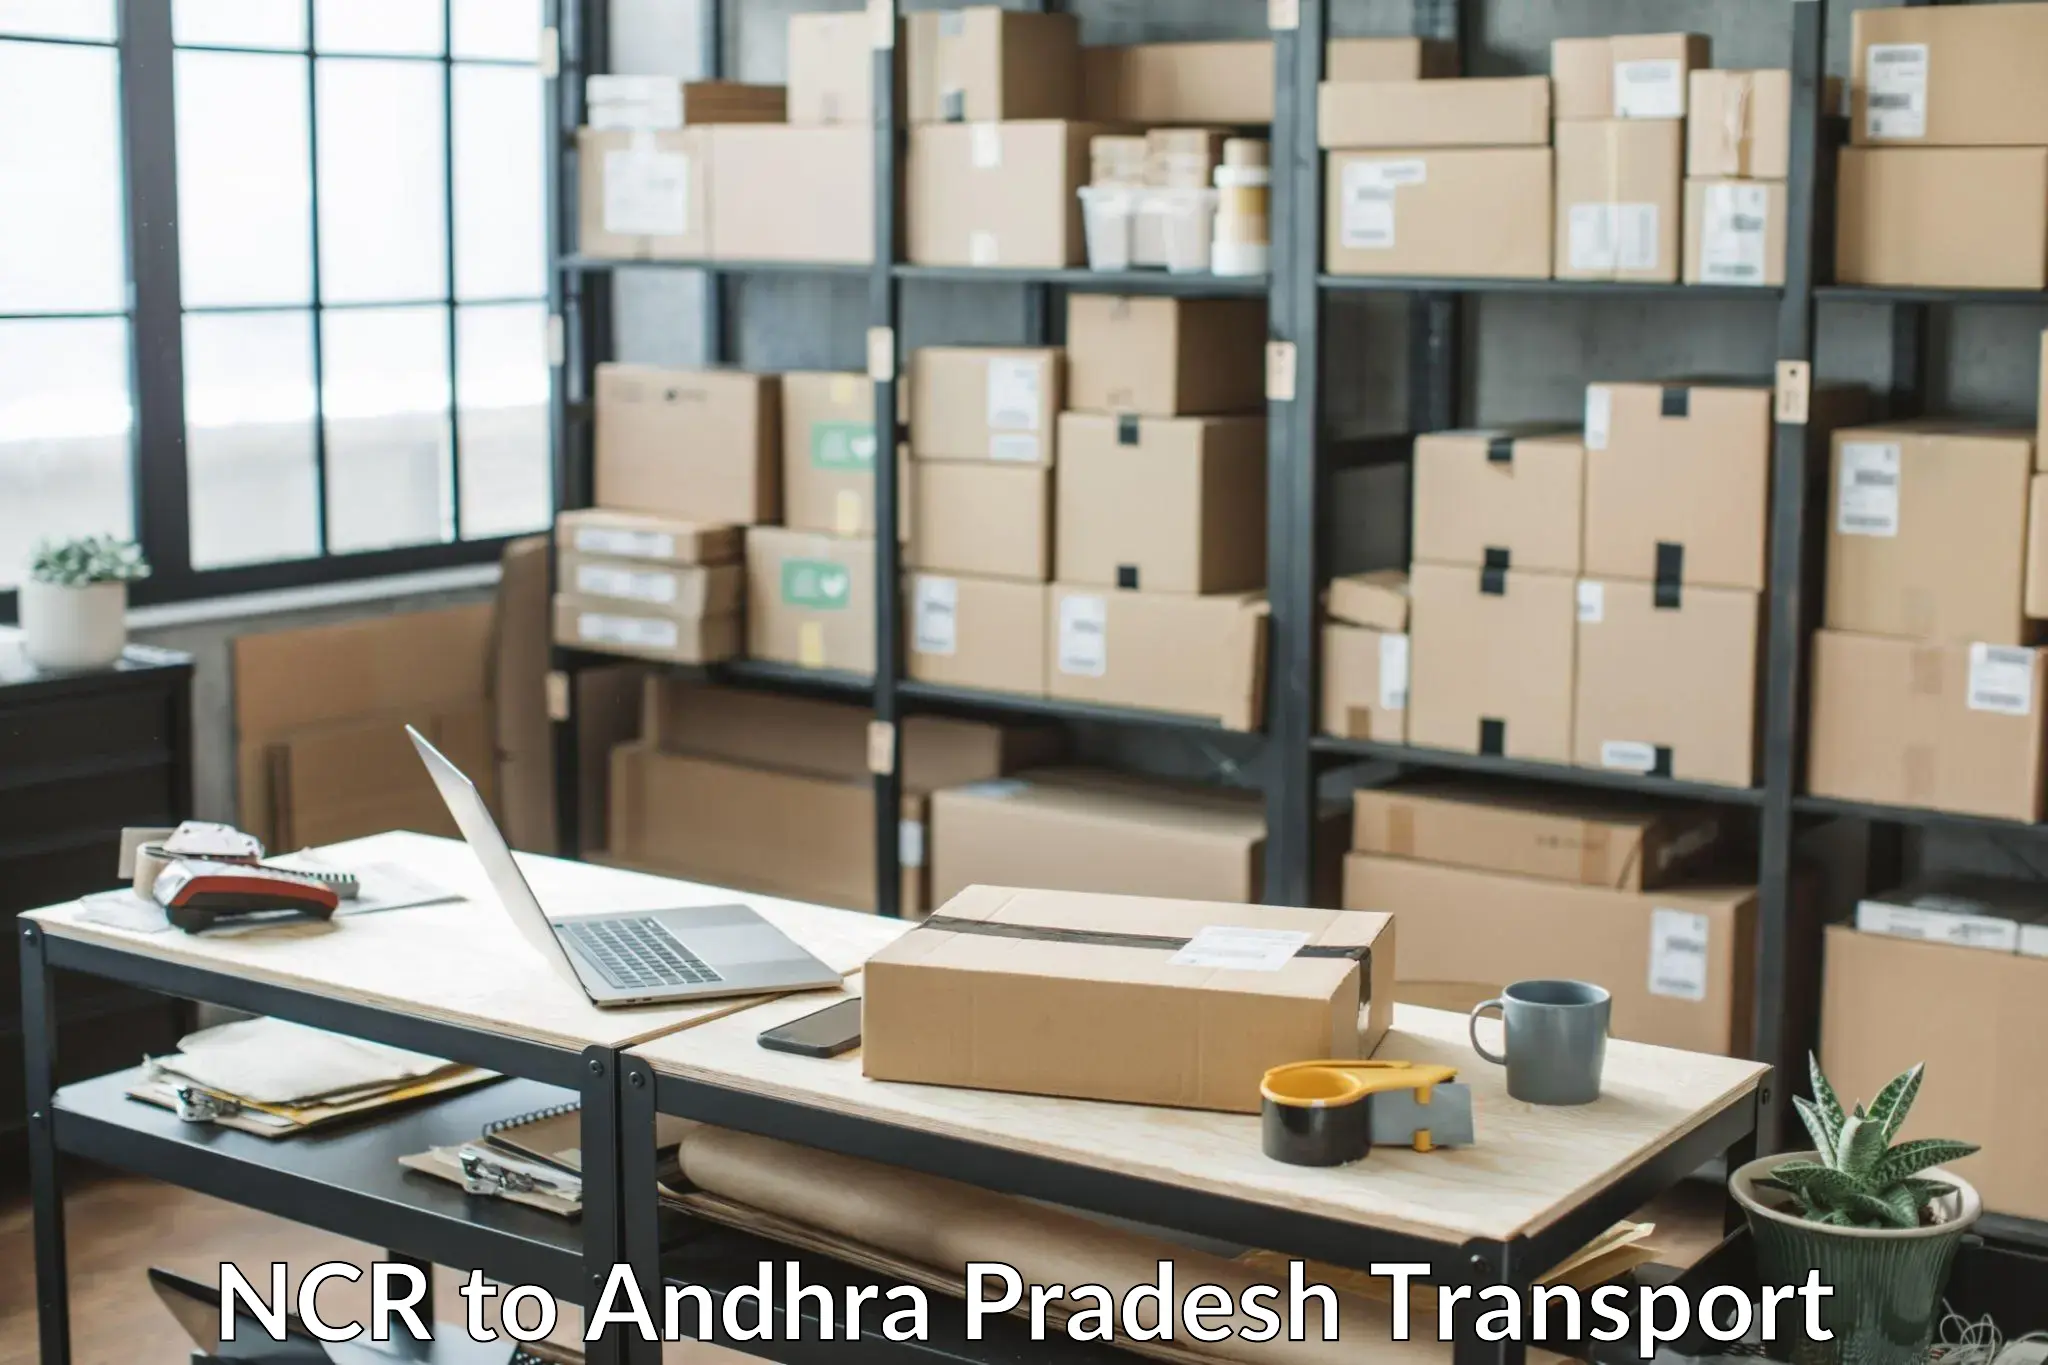 Delivery service NCR to Visakhapatnam Port